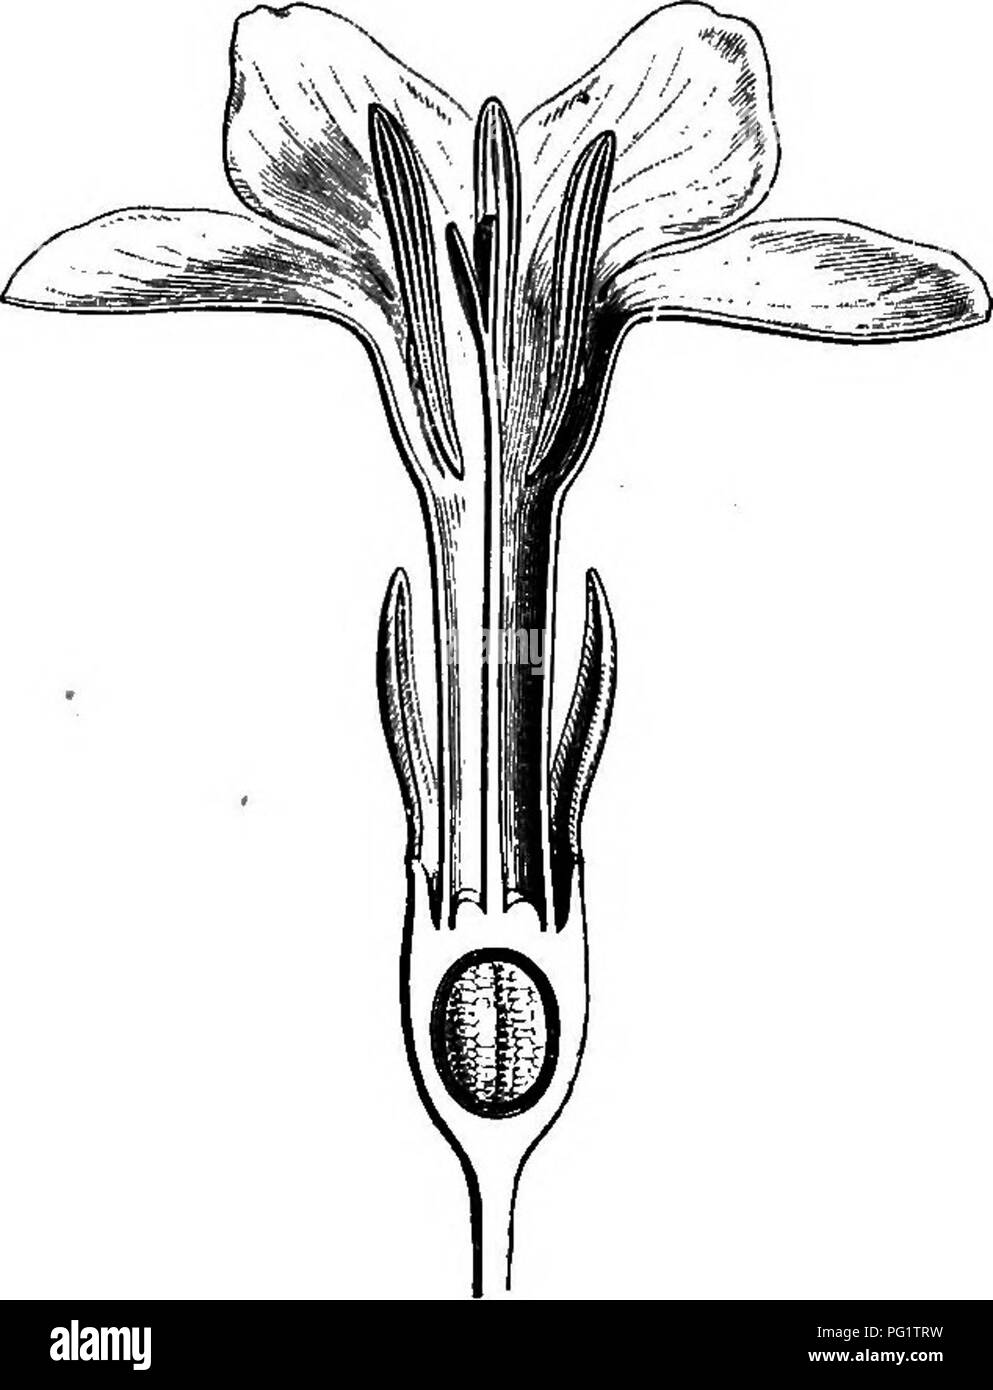 . The natural history of plants. Botany. Fig. 297. Flower ®. Fig. 298. Long. sect, of flower. The leaves are opposite, very rarely verticillate, accompanied by intrapetiolar stipules most frequently connate in a sheath. The flowers,^ varying much in appearance, are rarely terminal, and more generally axillary, solitary or in cymes, with longer or shorter pedicels or even none. In the Genipas named Griffithia,^ often spinous or climbing, the flowers, small in figure, are in coryinbiform cymes, and the tube of the hypocrateriform corolla is generally longer than the lobes. They are plants of tro Stock Photo